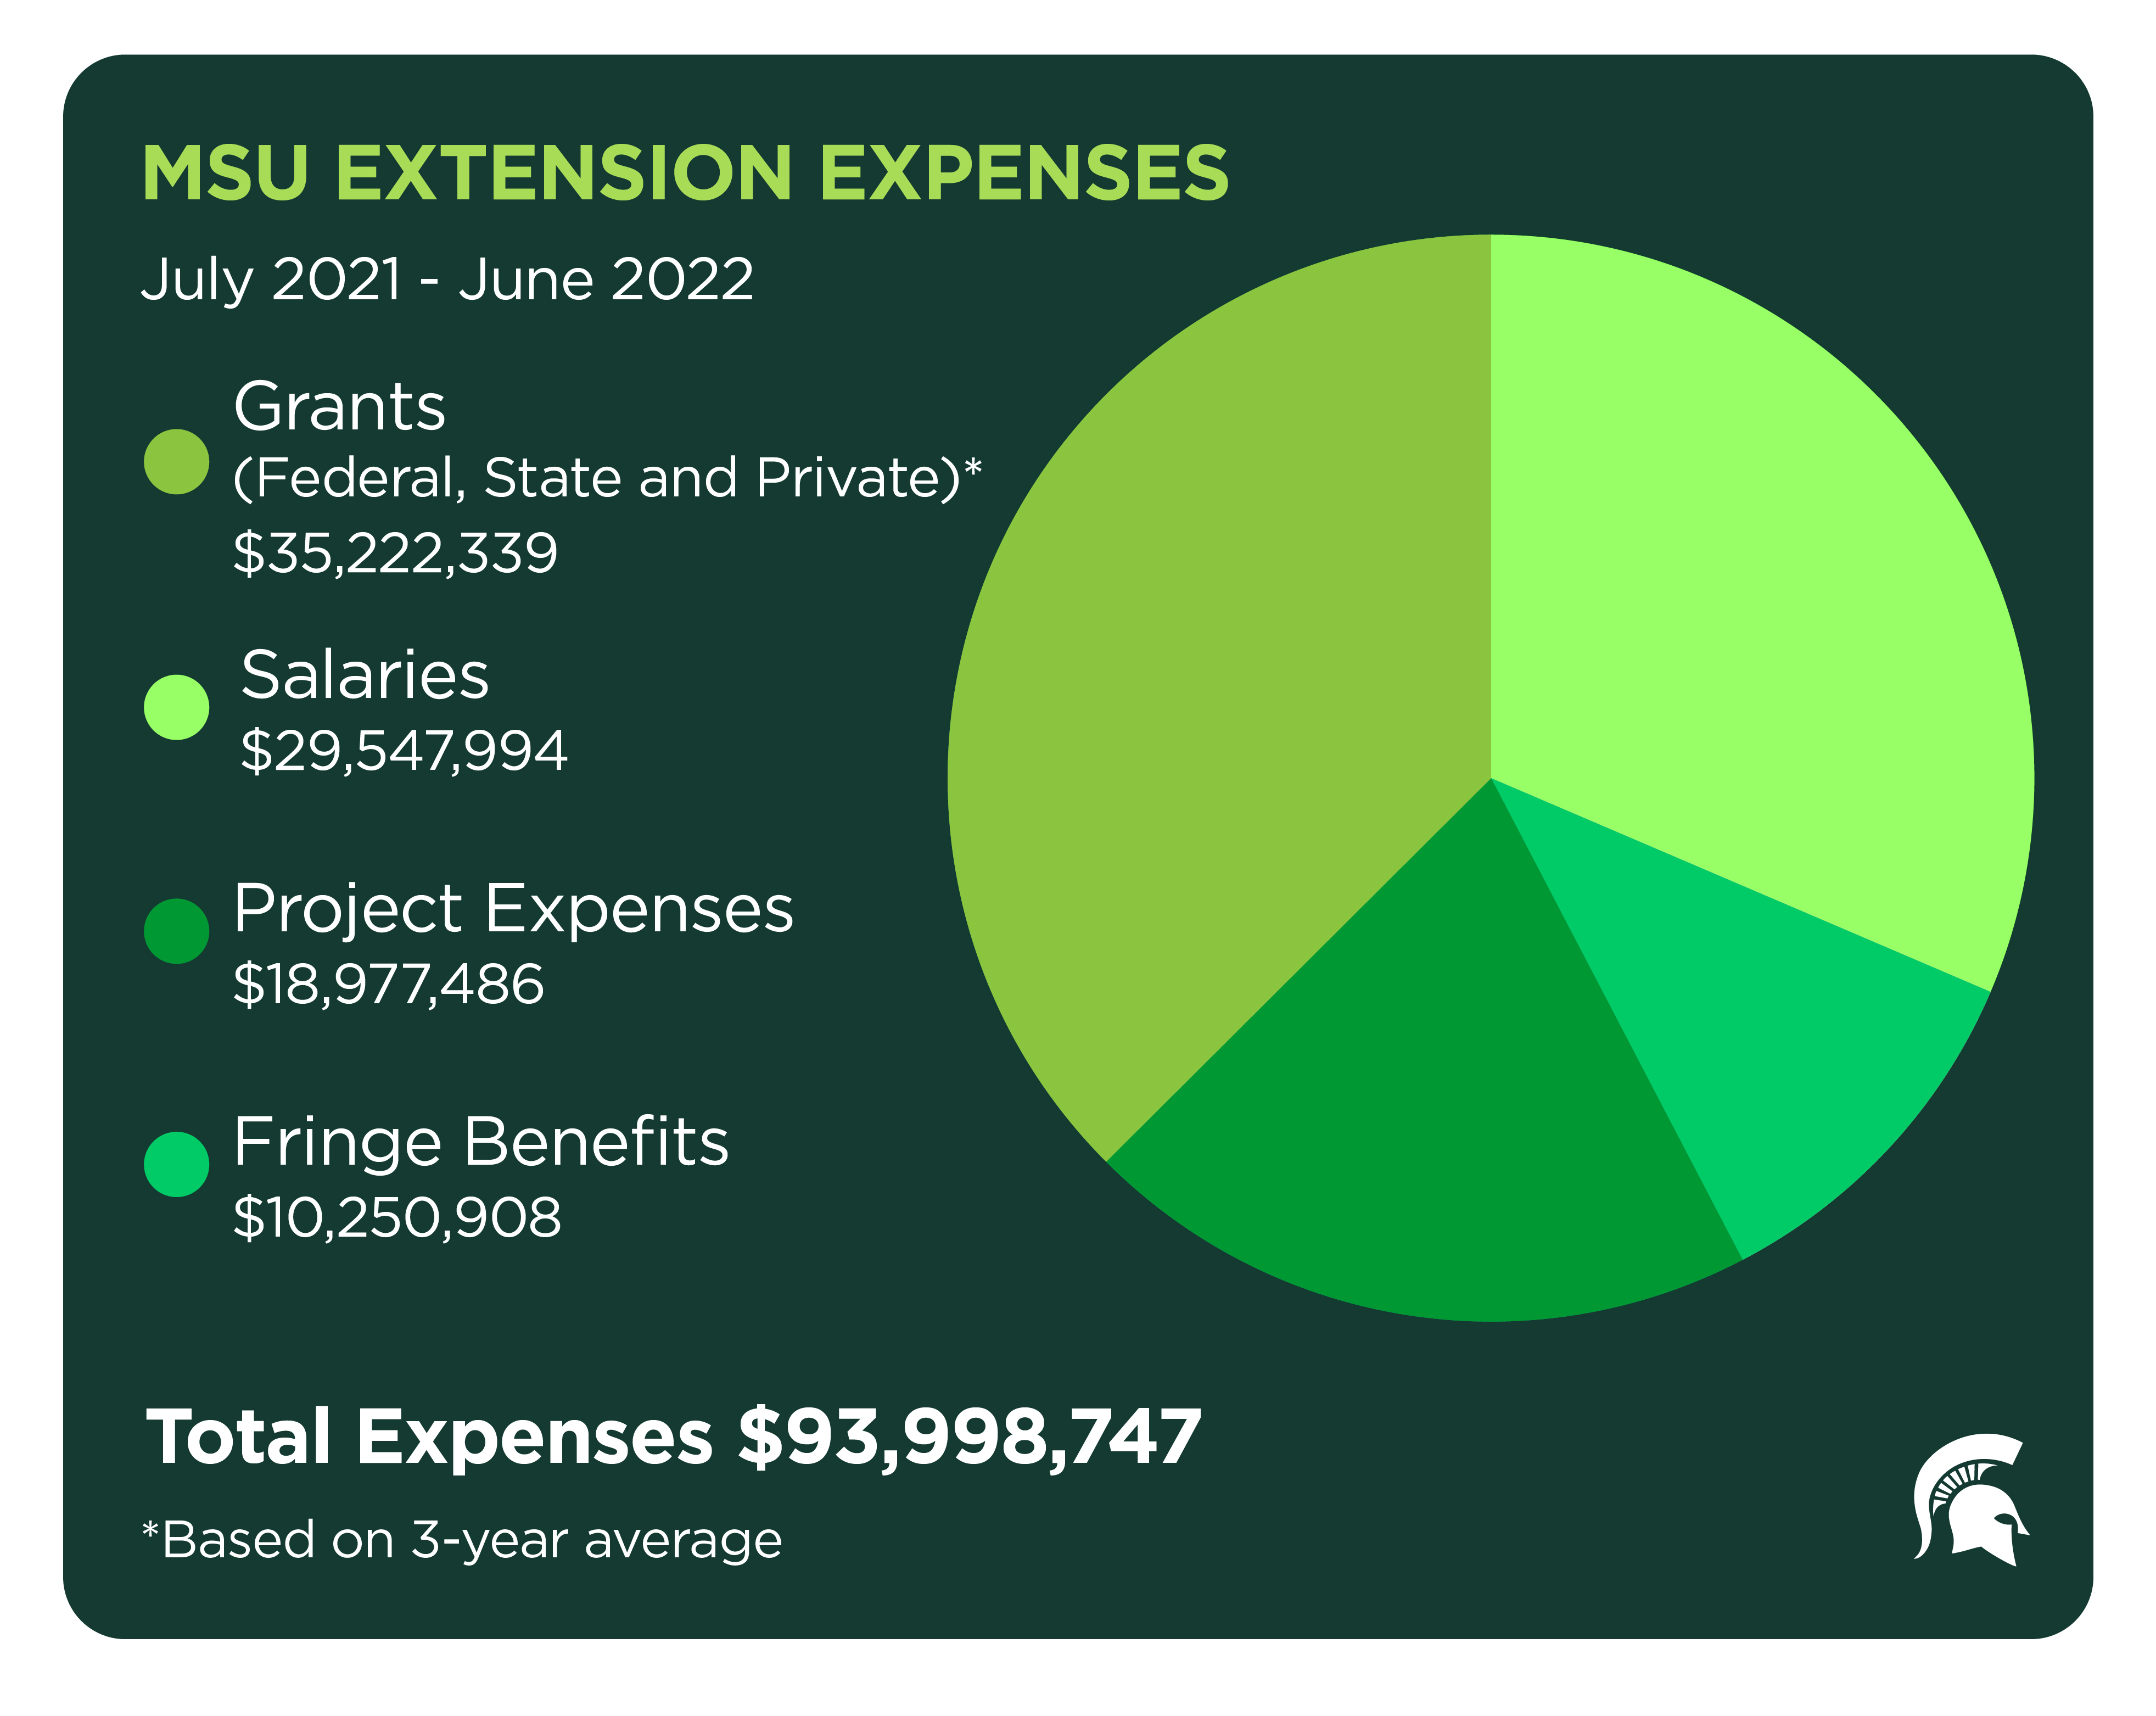 MSU Extension expenses totaled nearly $94M.